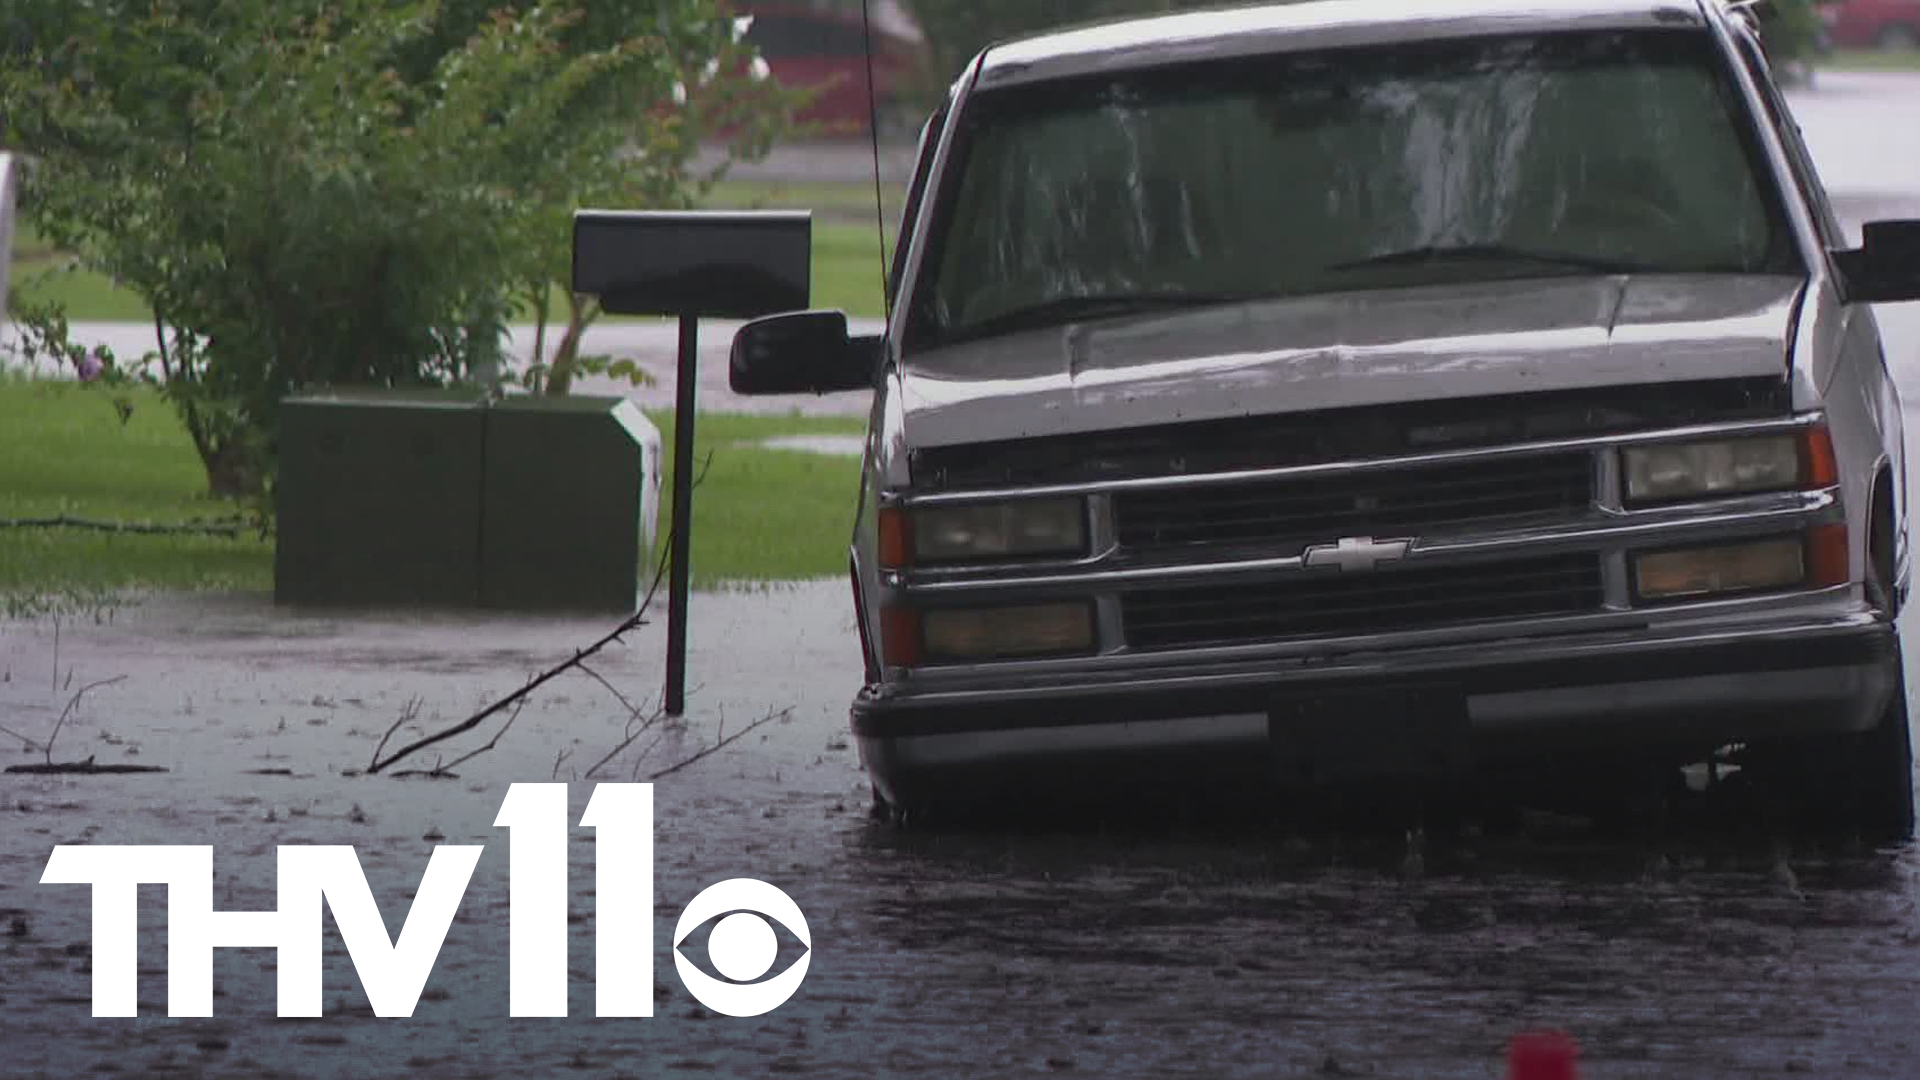 The southern part of Arkansas is facing flooding and road closures as people scramble to make sure their homes are safe from the rising waters.